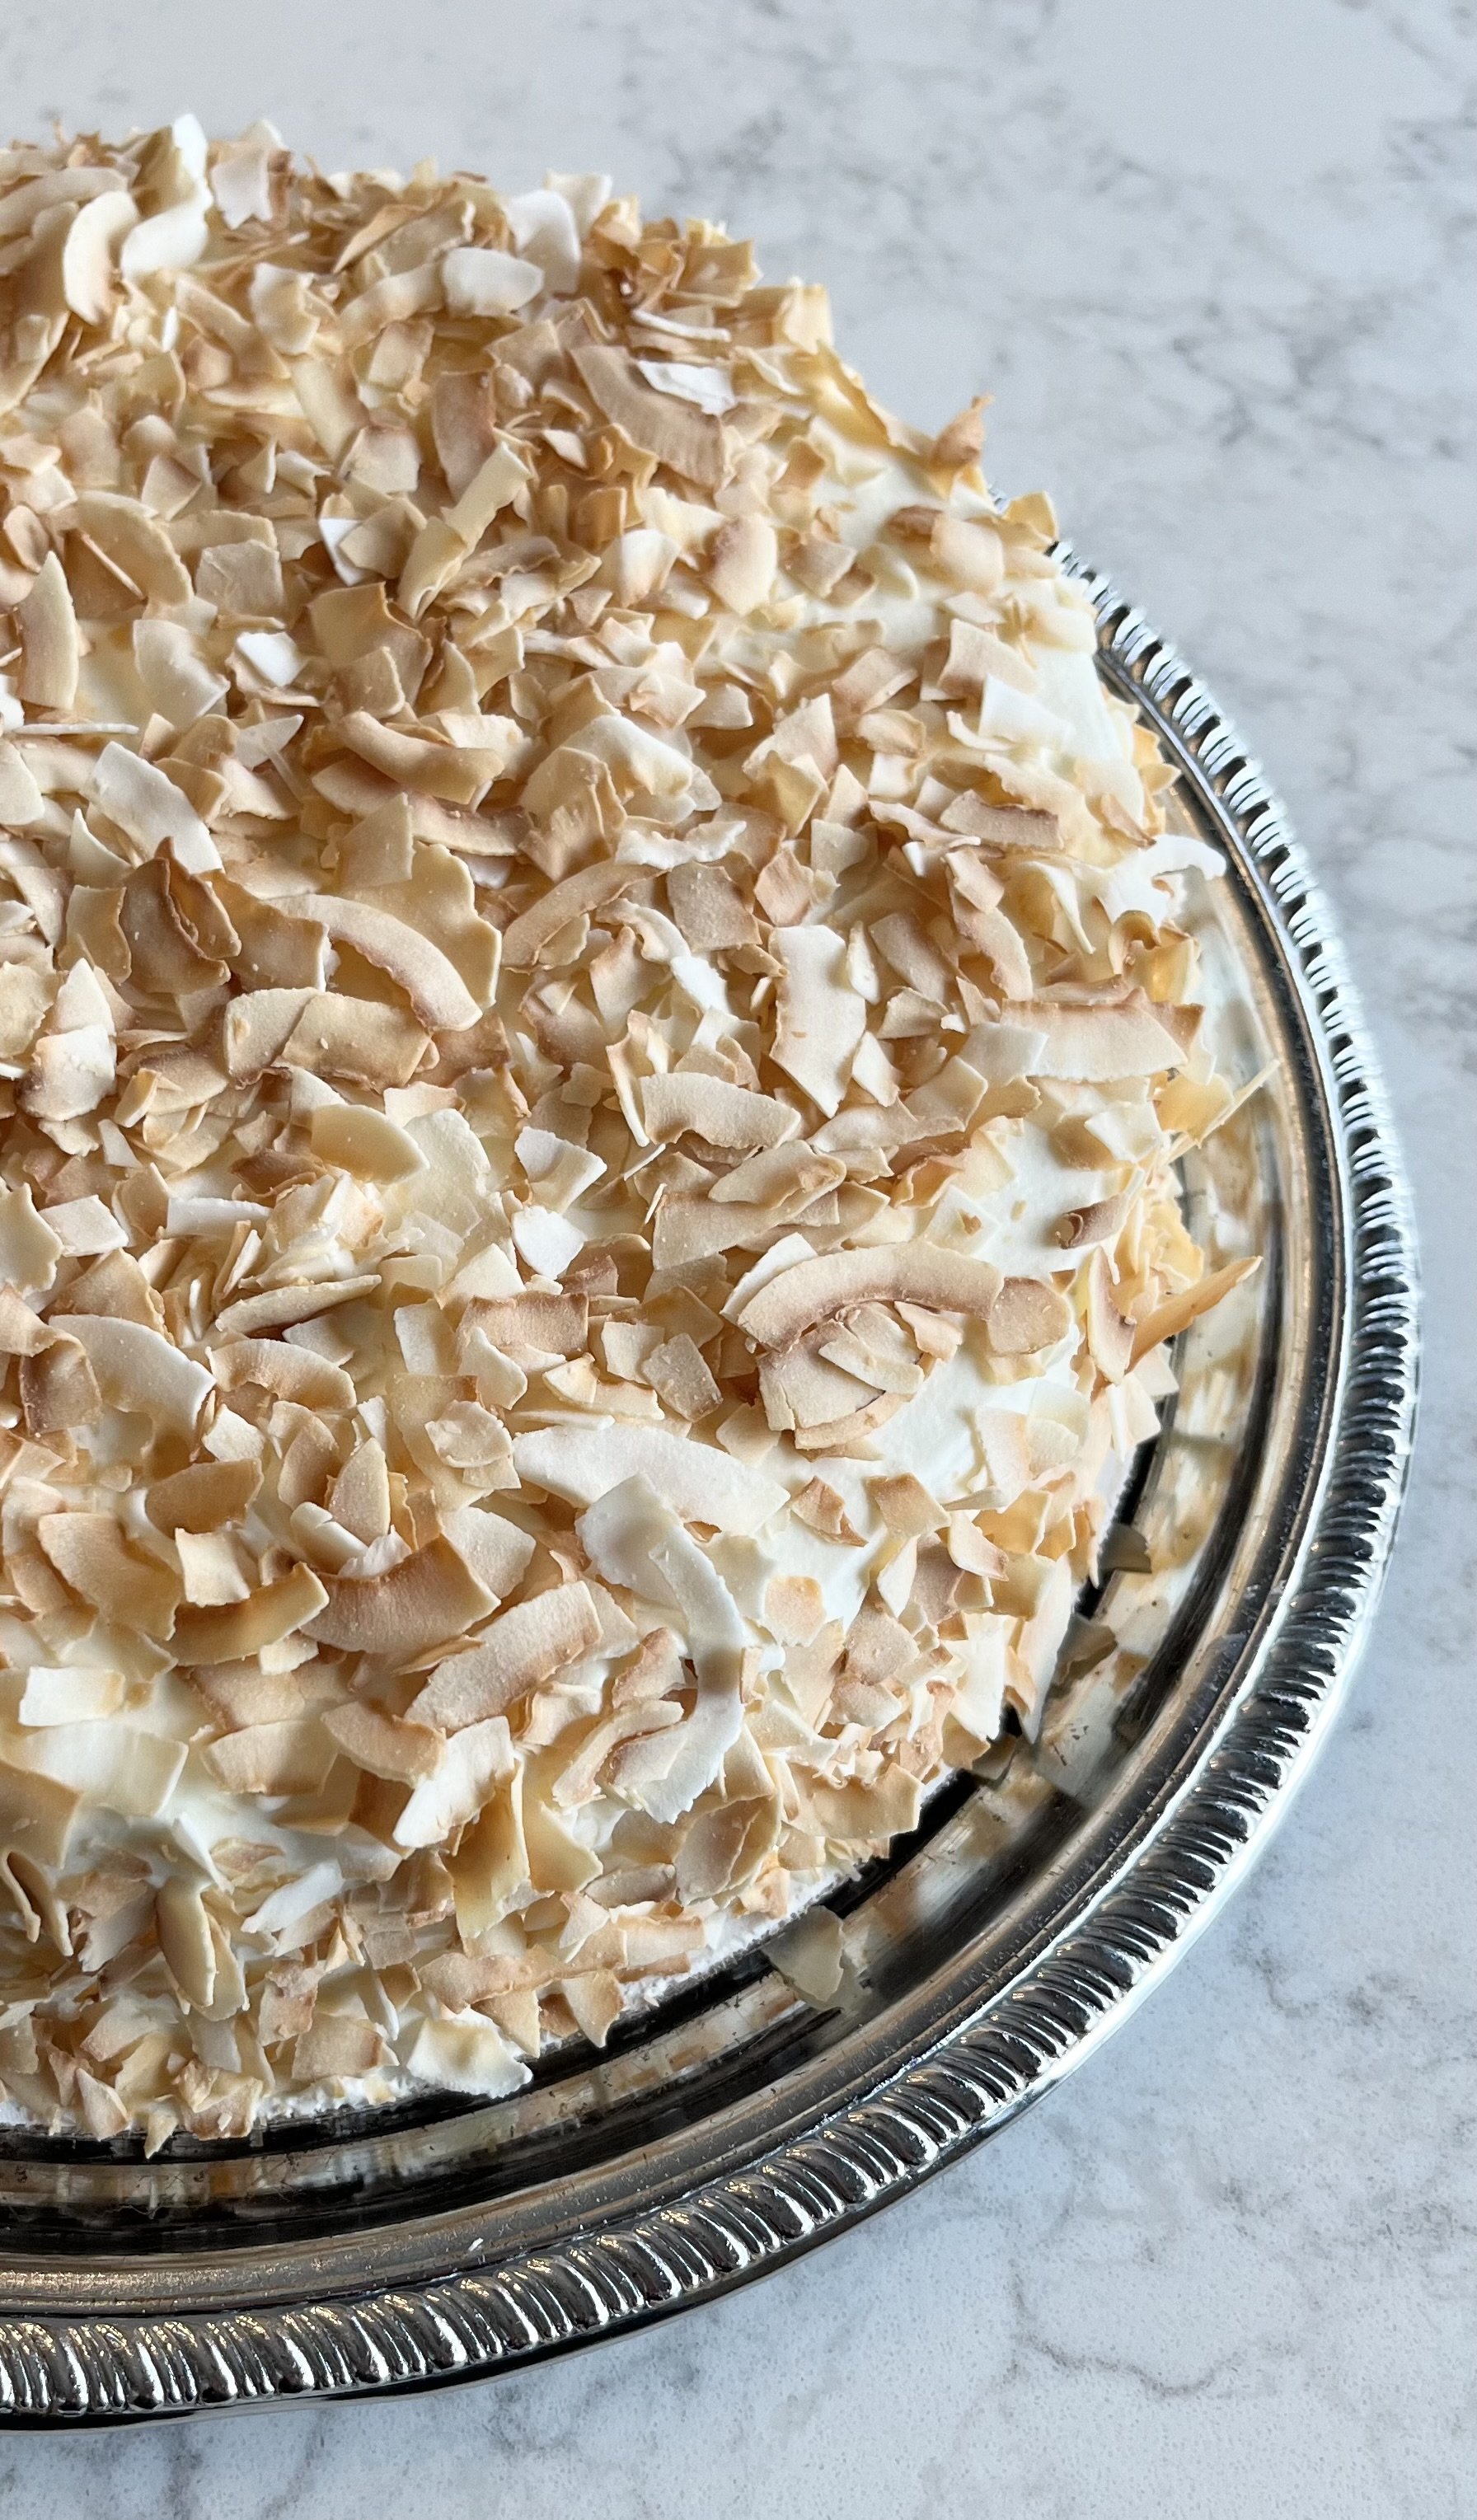 Coconut Tres Leches